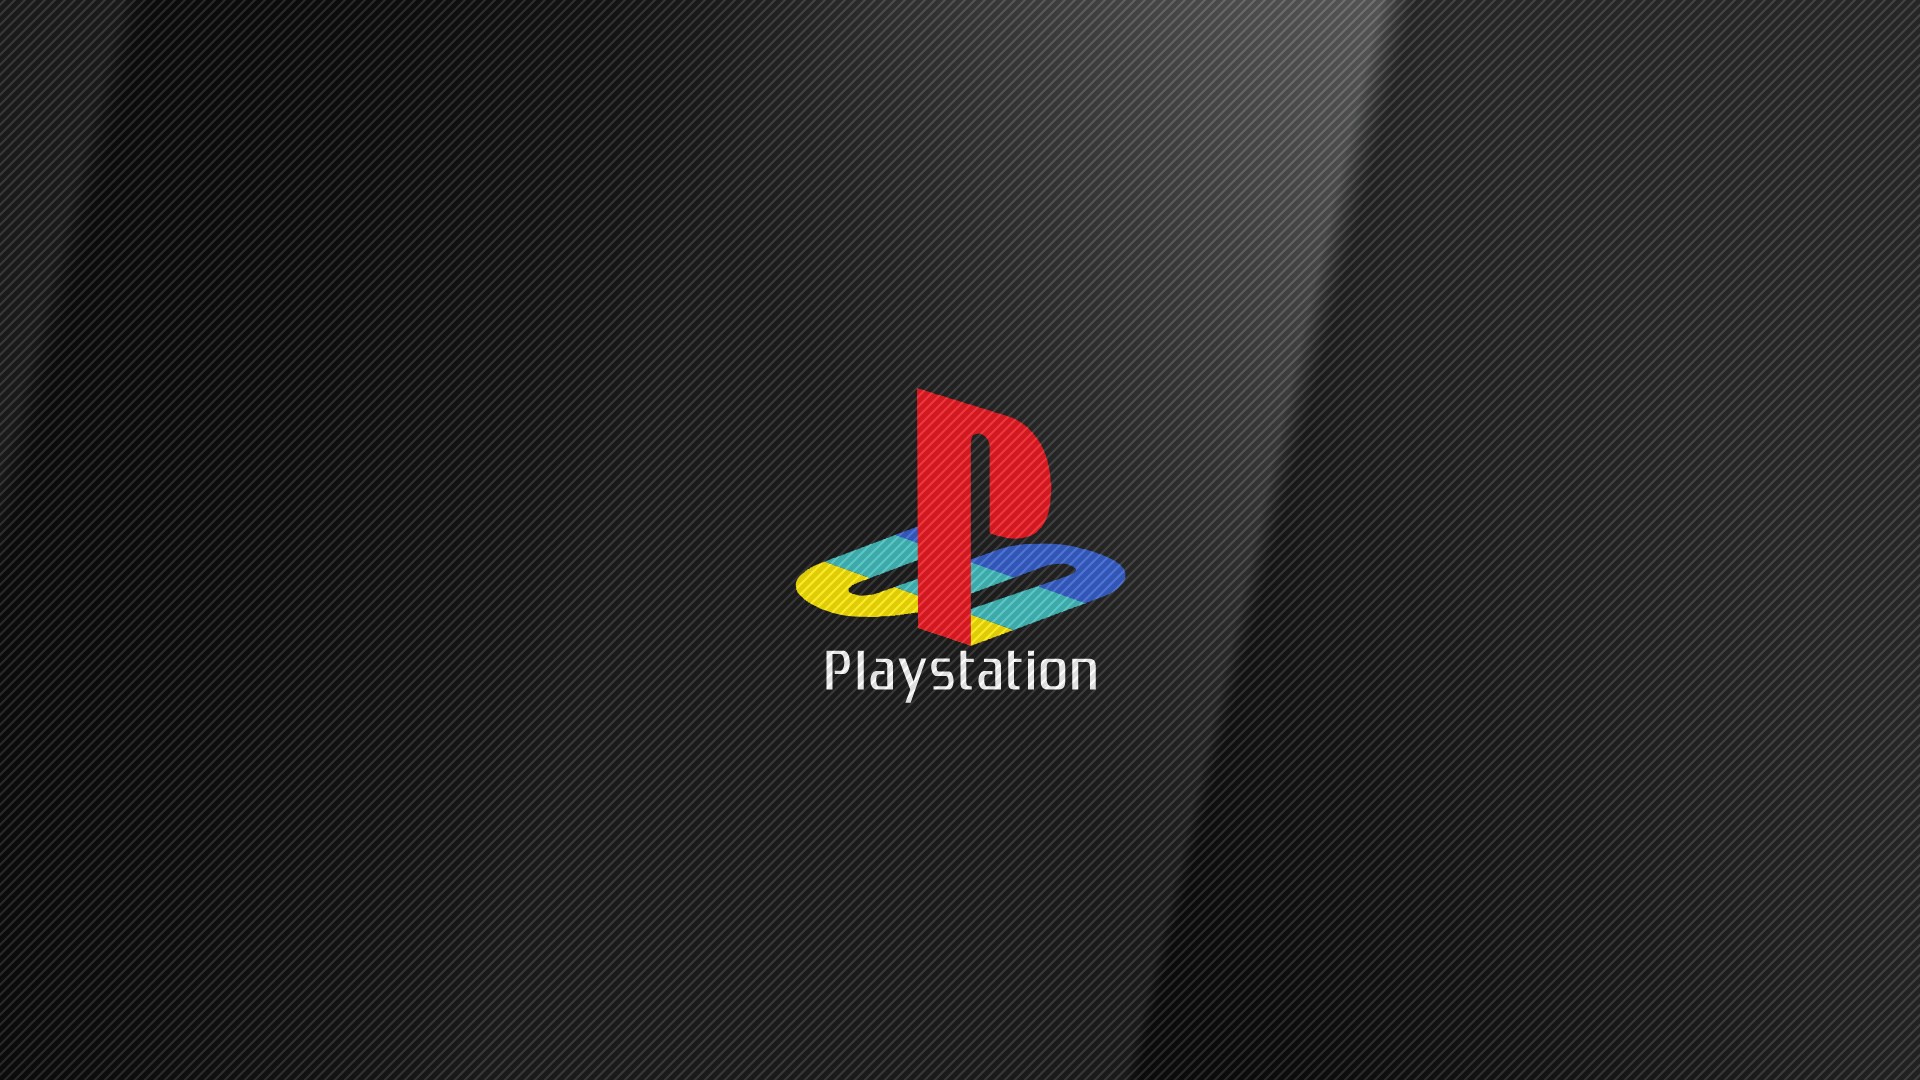 General 1920x1080 PlayStation video games logo gray background